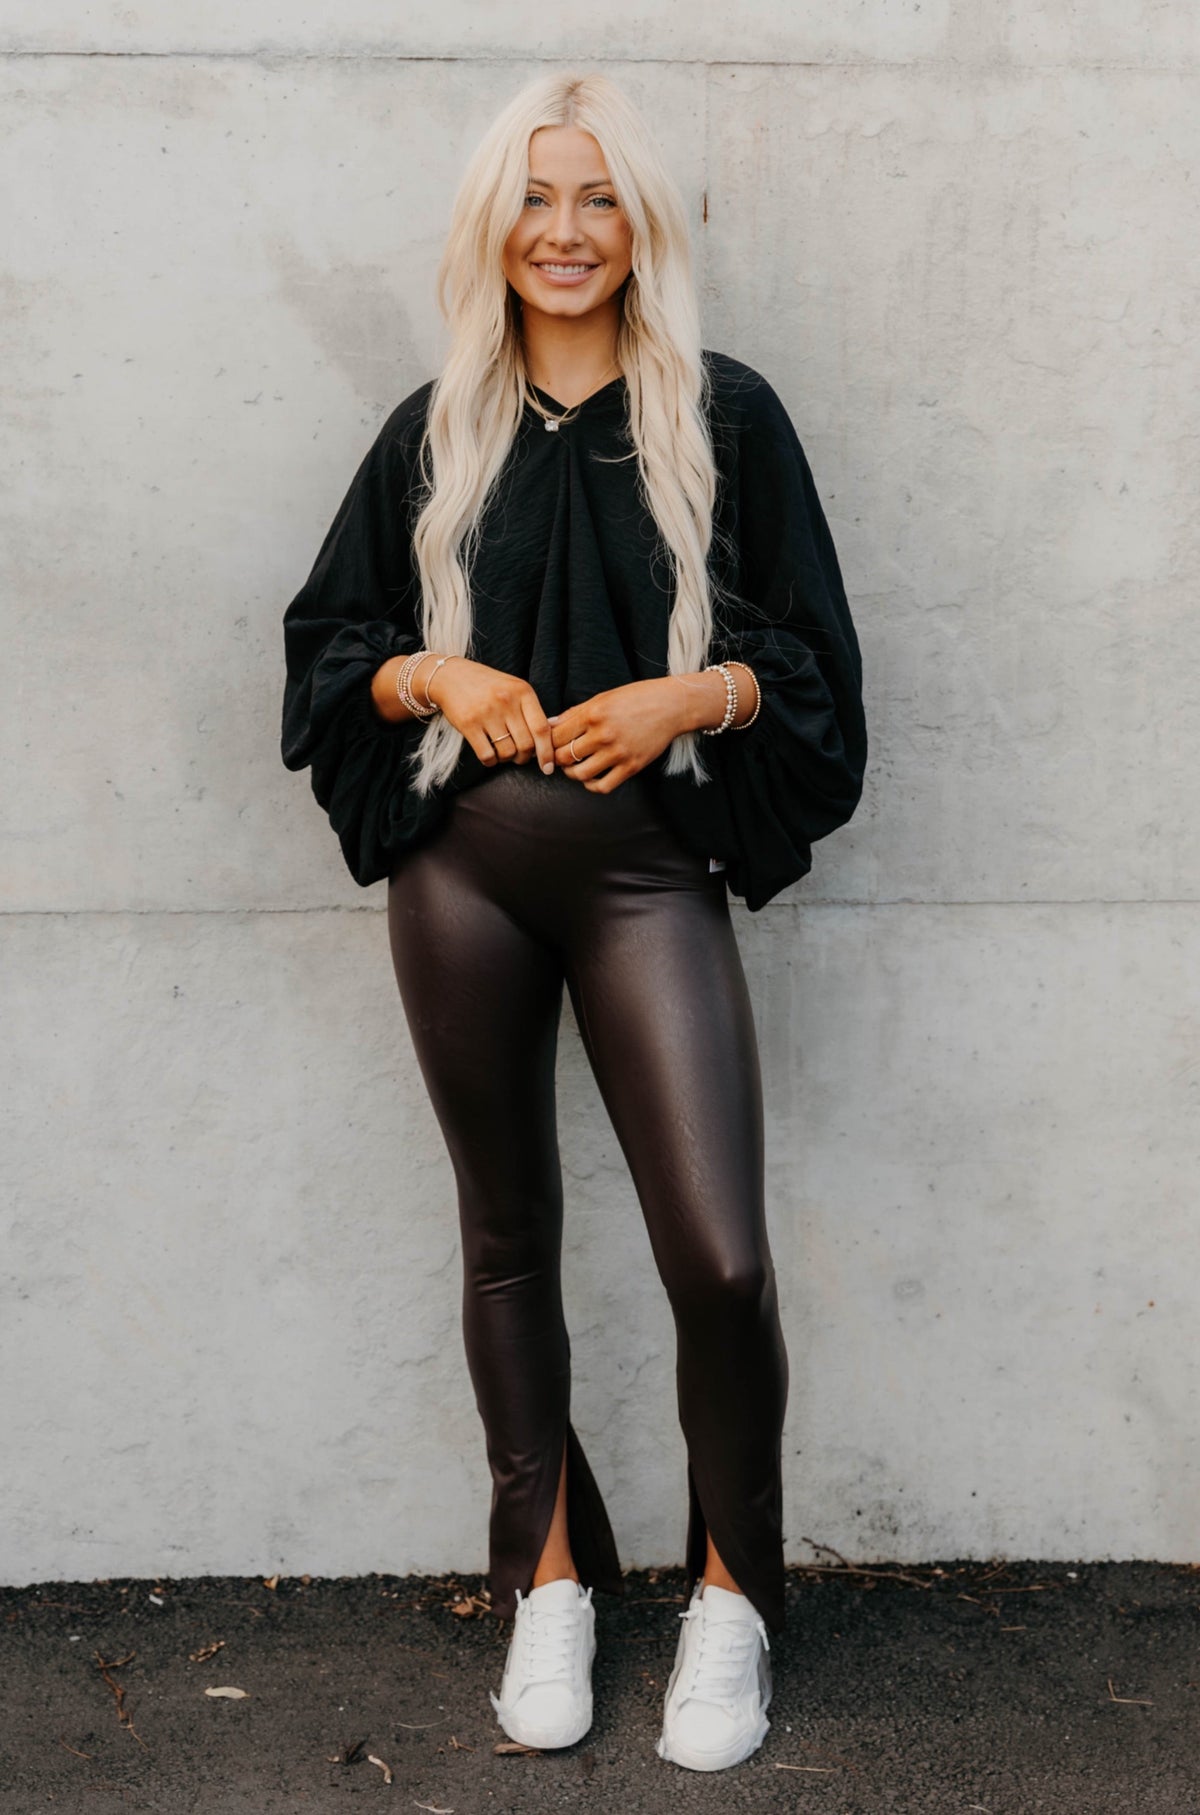 Spanx Leather-Like Front Slit Leggings - Cherry Chocolate - FINAL SALE –  She She Boutique